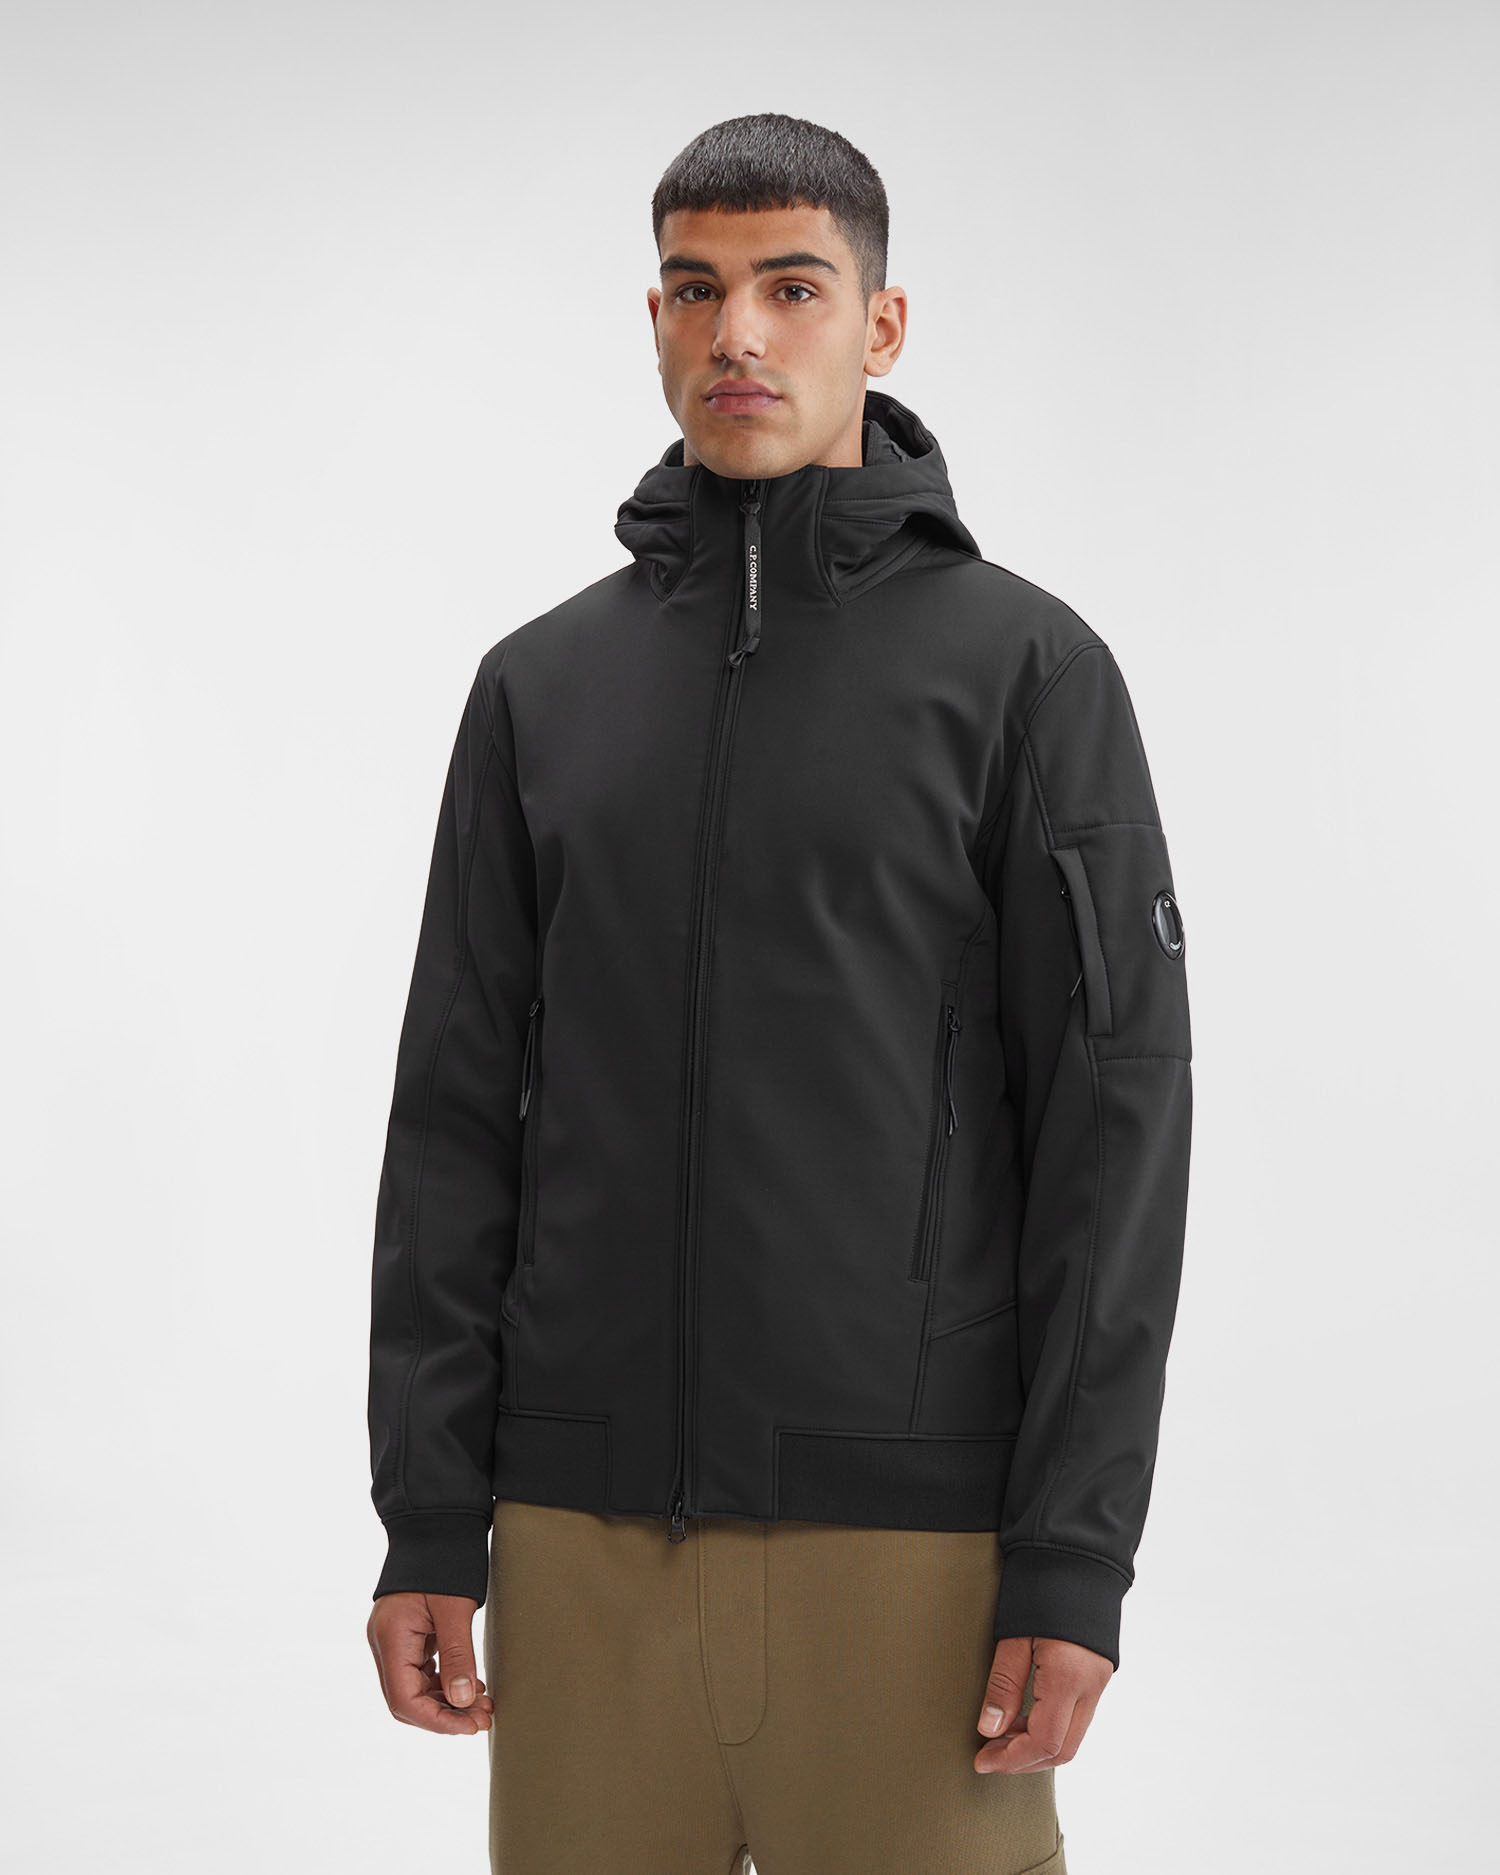 C.P. Shell-R Hooded Jacket | C.P. Company Online Store